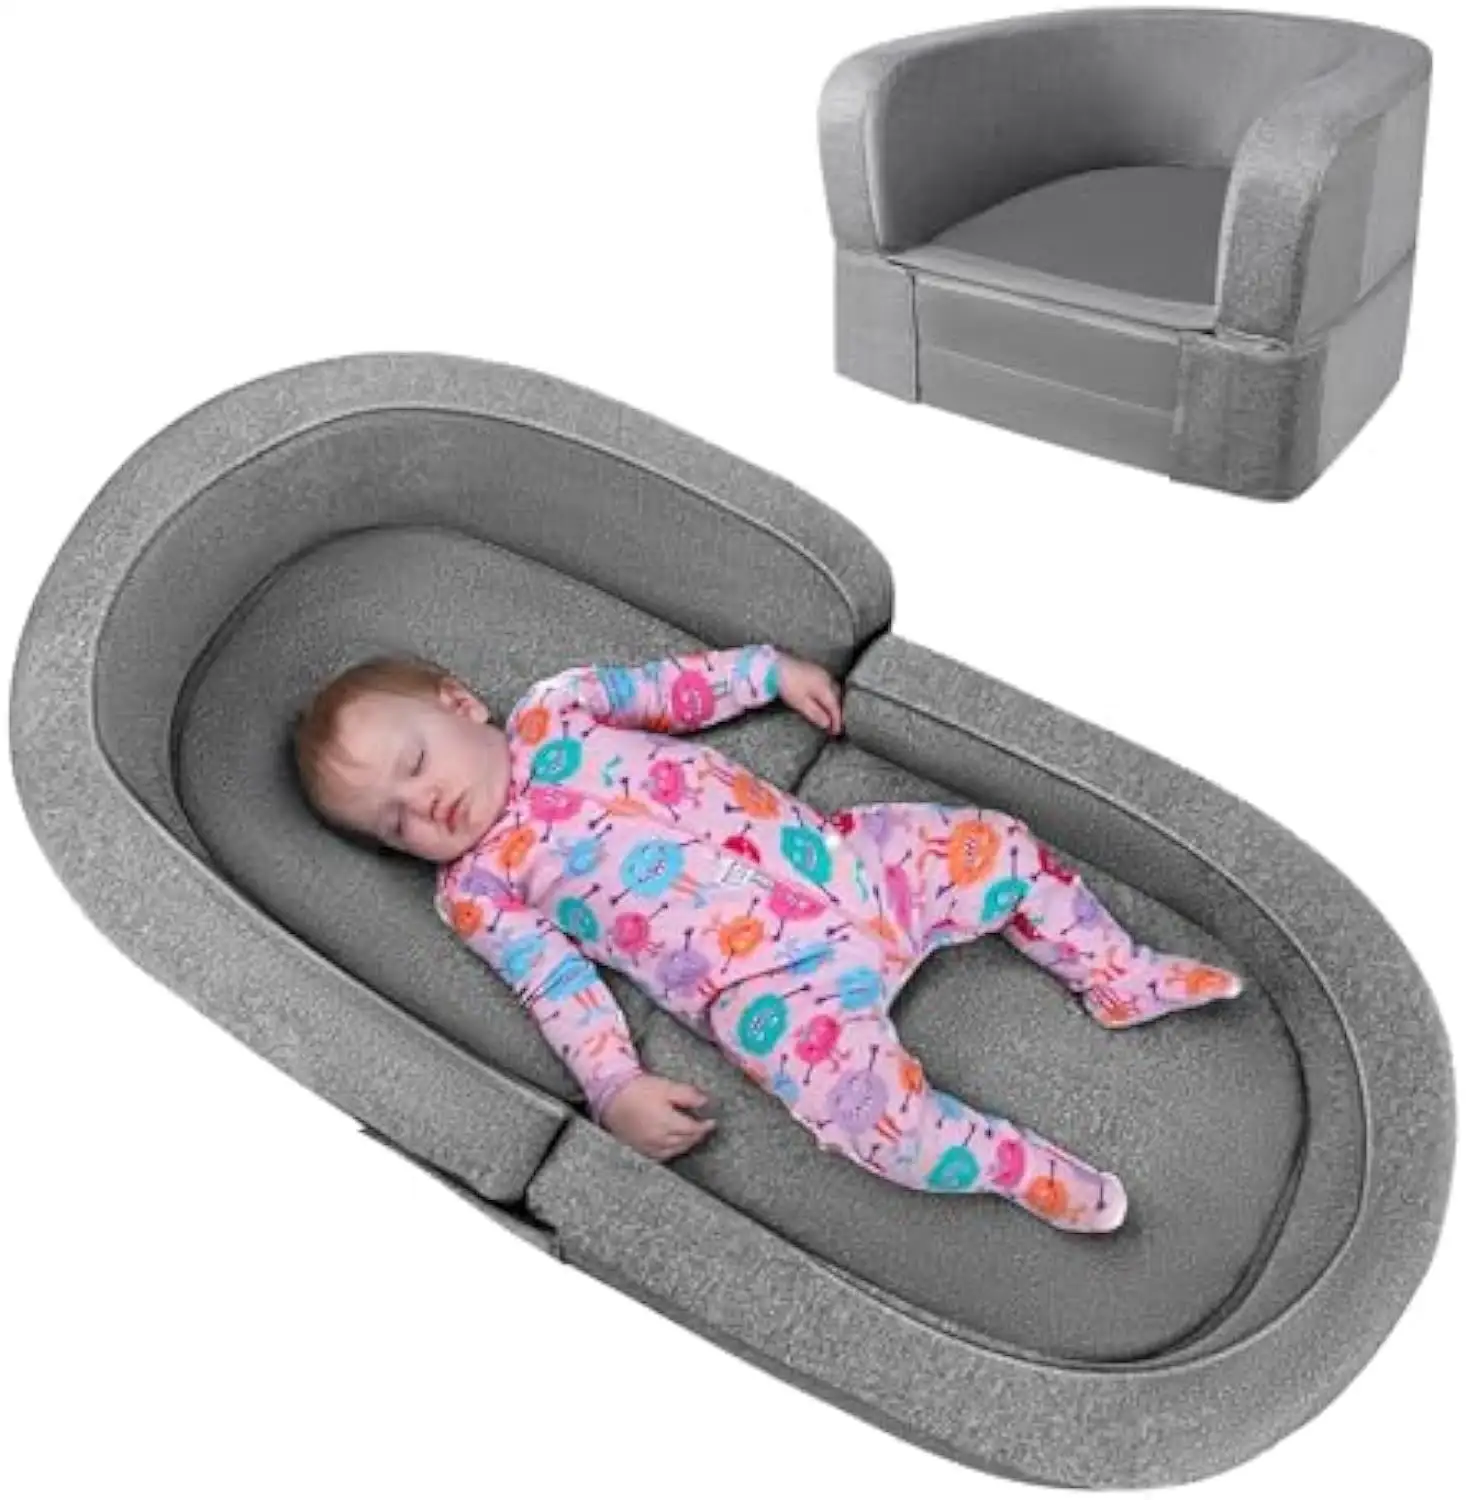 Machine Washable Fabric Kids Sofa Foldable Portable Toddler Travel Bed 2-in-1 Kids Travel Beds Sofa Chair